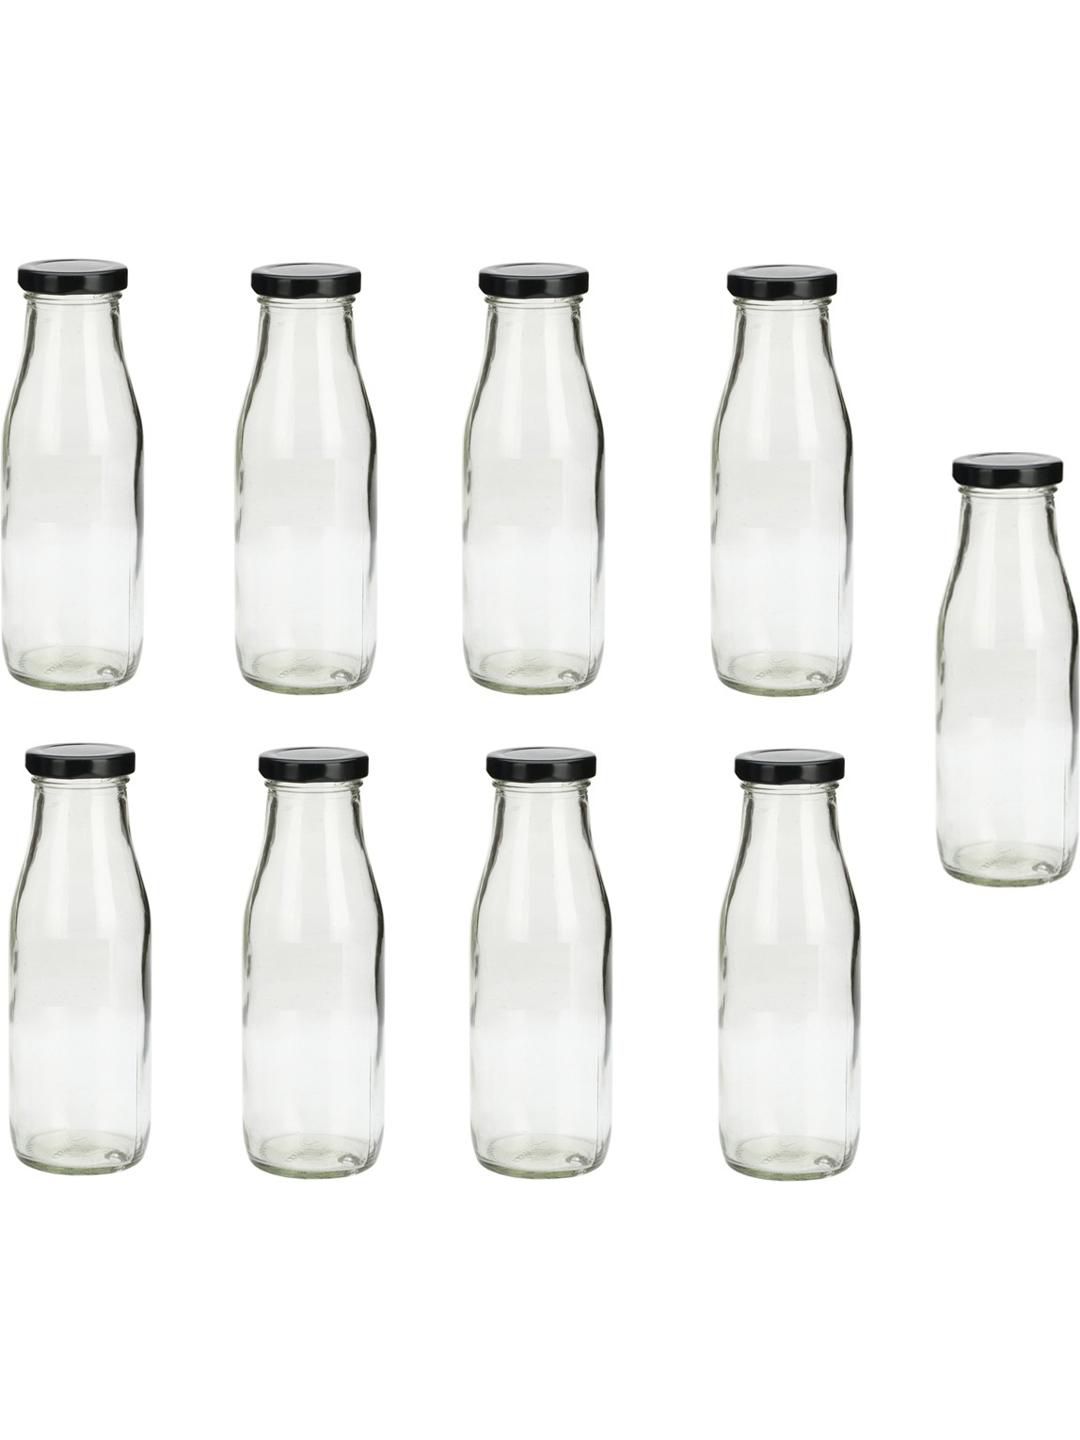     			AFAST Multipurpose Bottle Glass Transparent Utility Container ( Set of 9 )